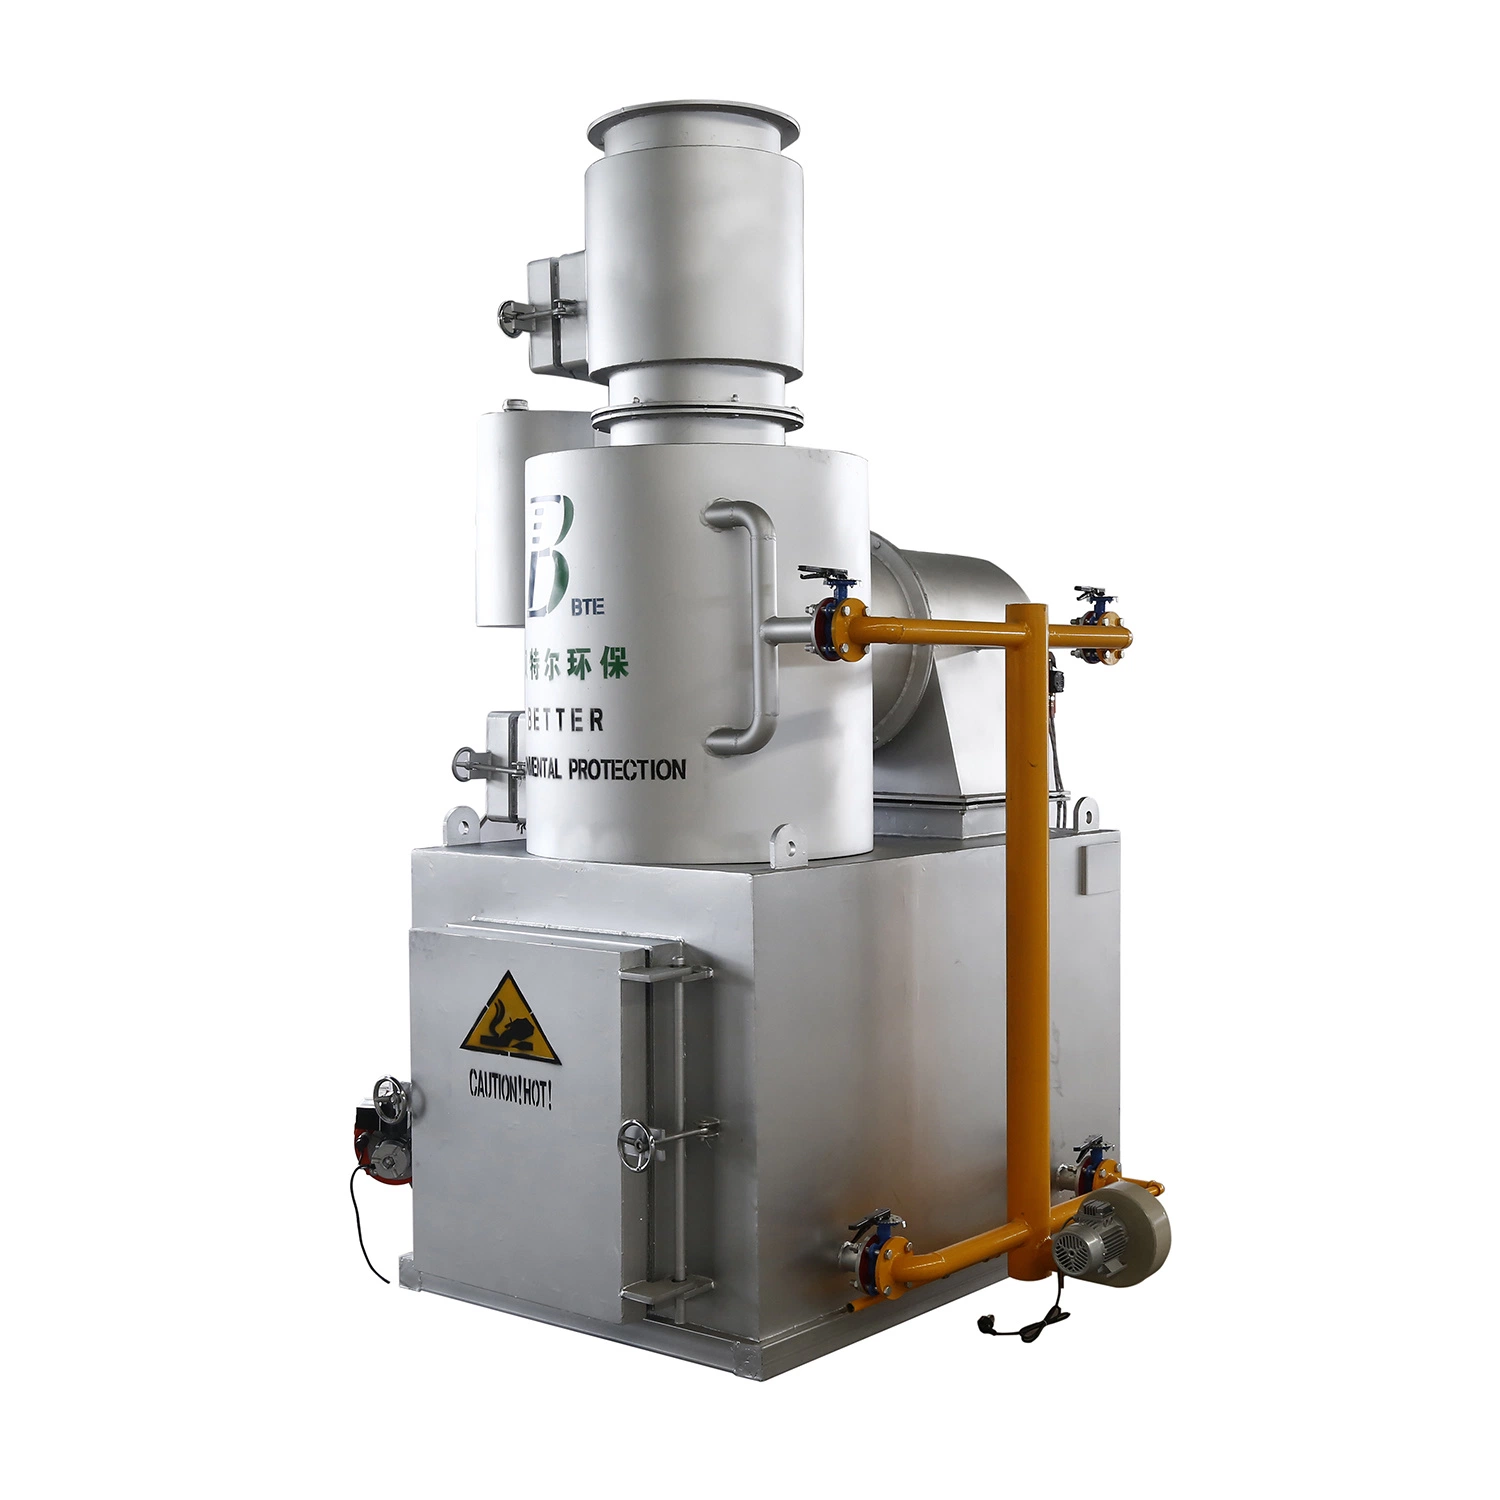 Various Types of Incinerators, Solid Waste Incineration, Medical Waste Incineration, etc. Can Be Customized According to The Needs